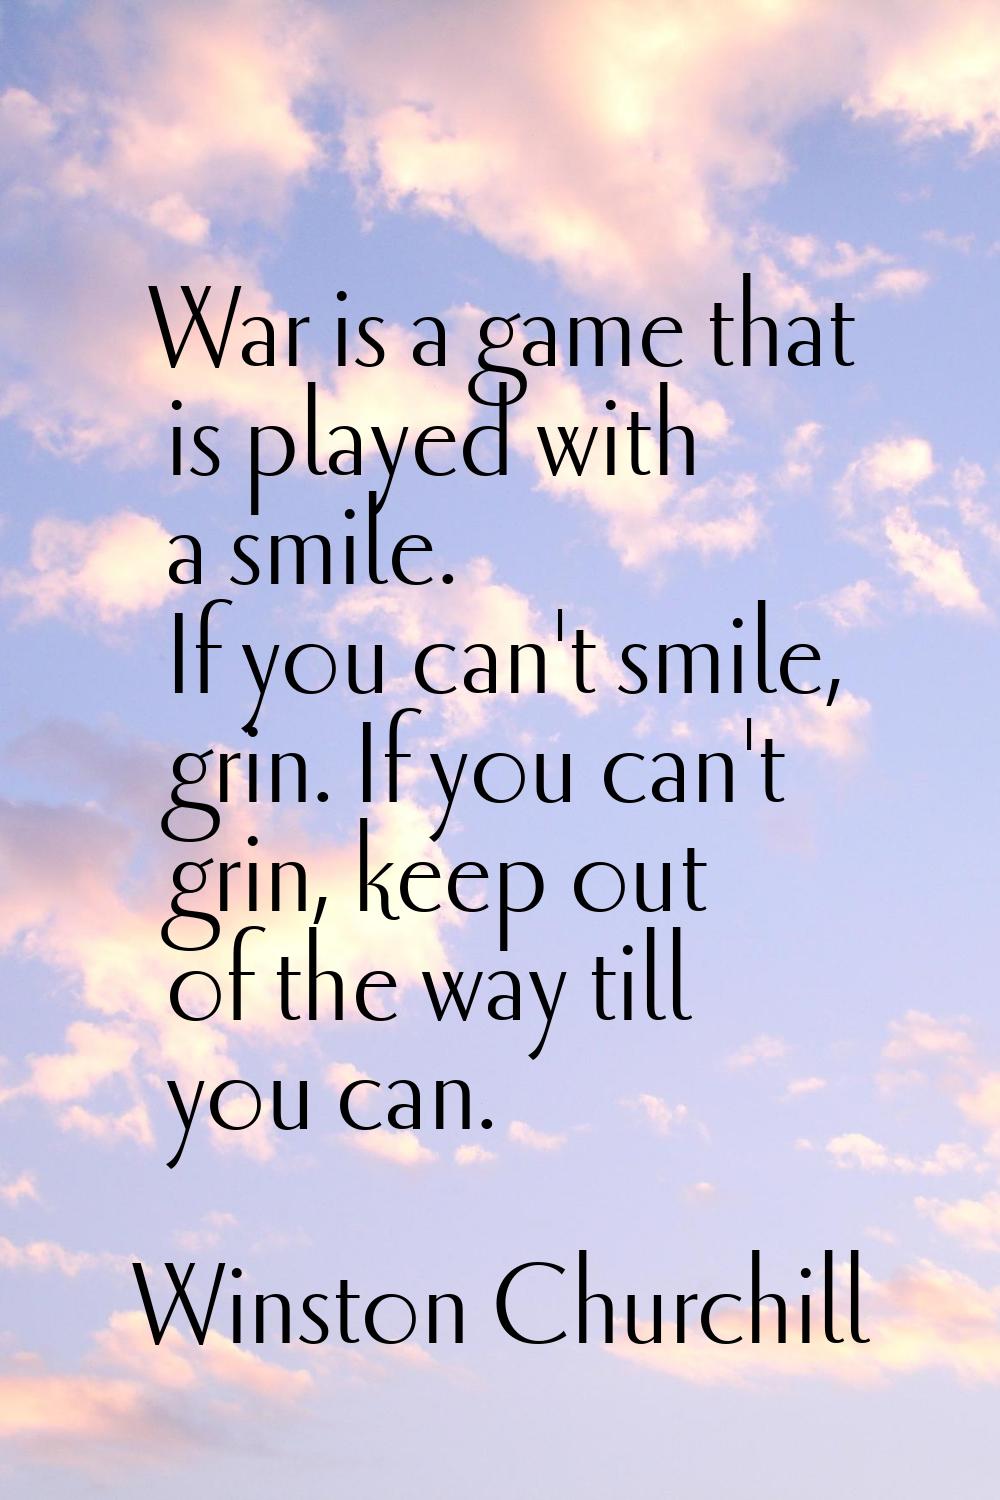 War is a game that is played with a smile. If you can't smile, grin. If you can't grin, keep out of